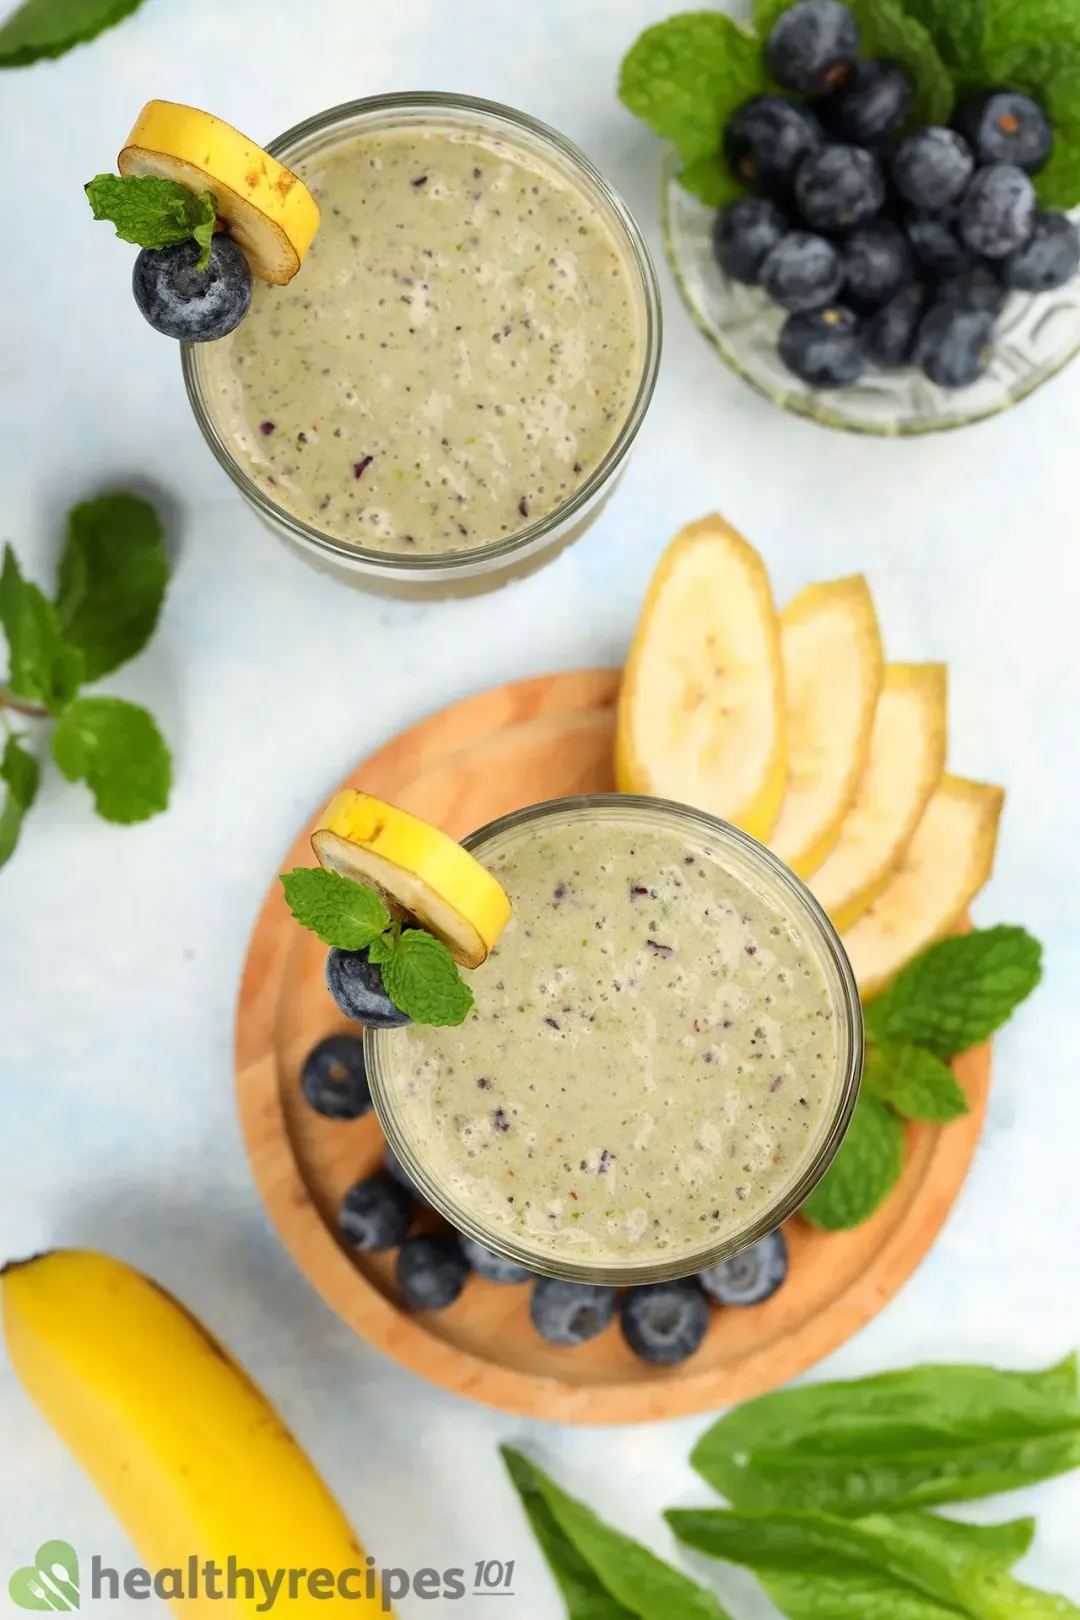 Is This Blueberry Spinach Smoothie Recipe Healthy